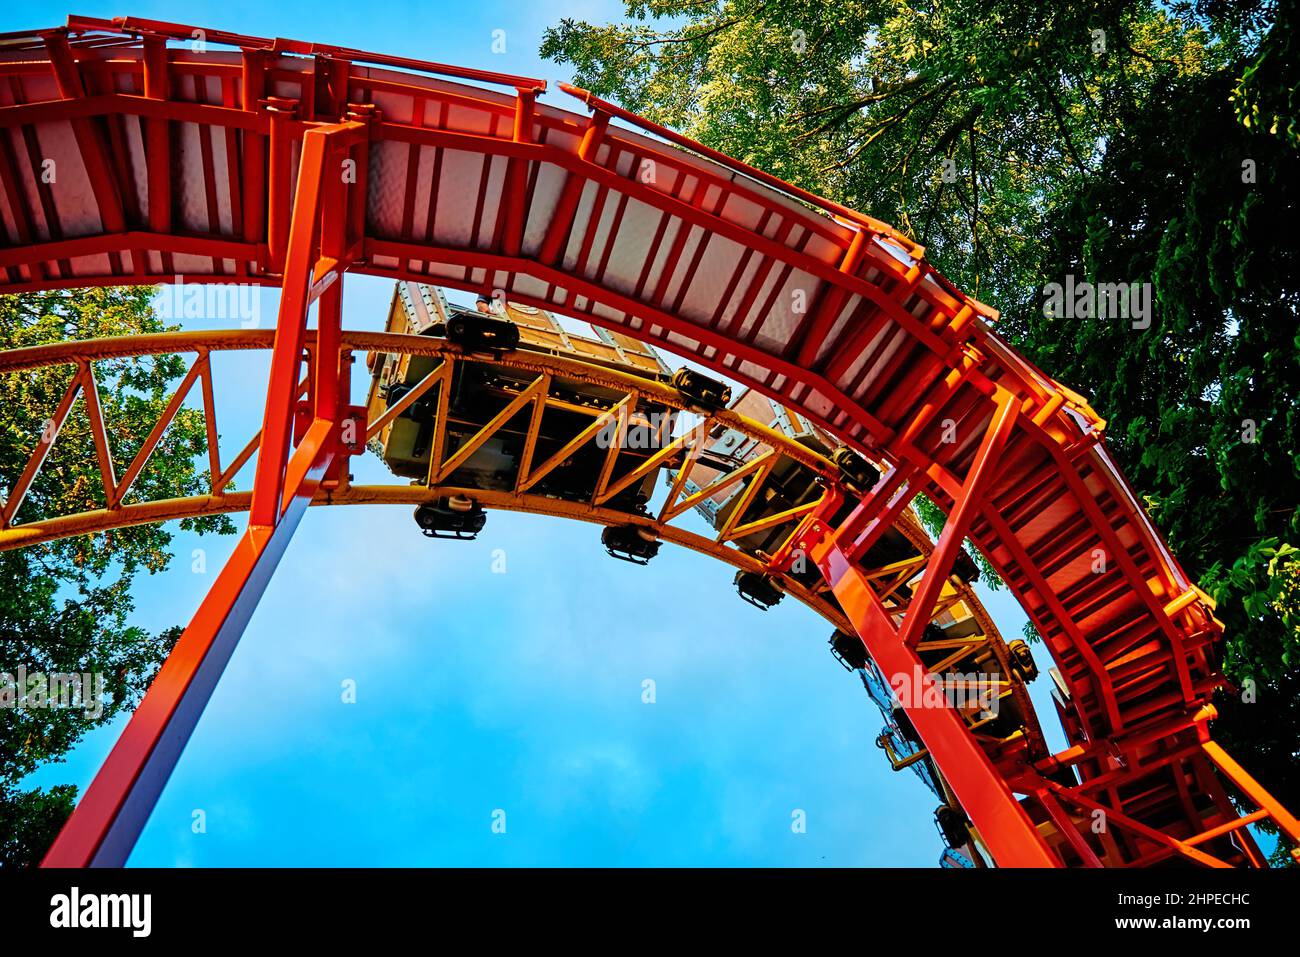 Part of looping roller coaster at summer day, Riding a rollercoaster at amusement park Stock Photo